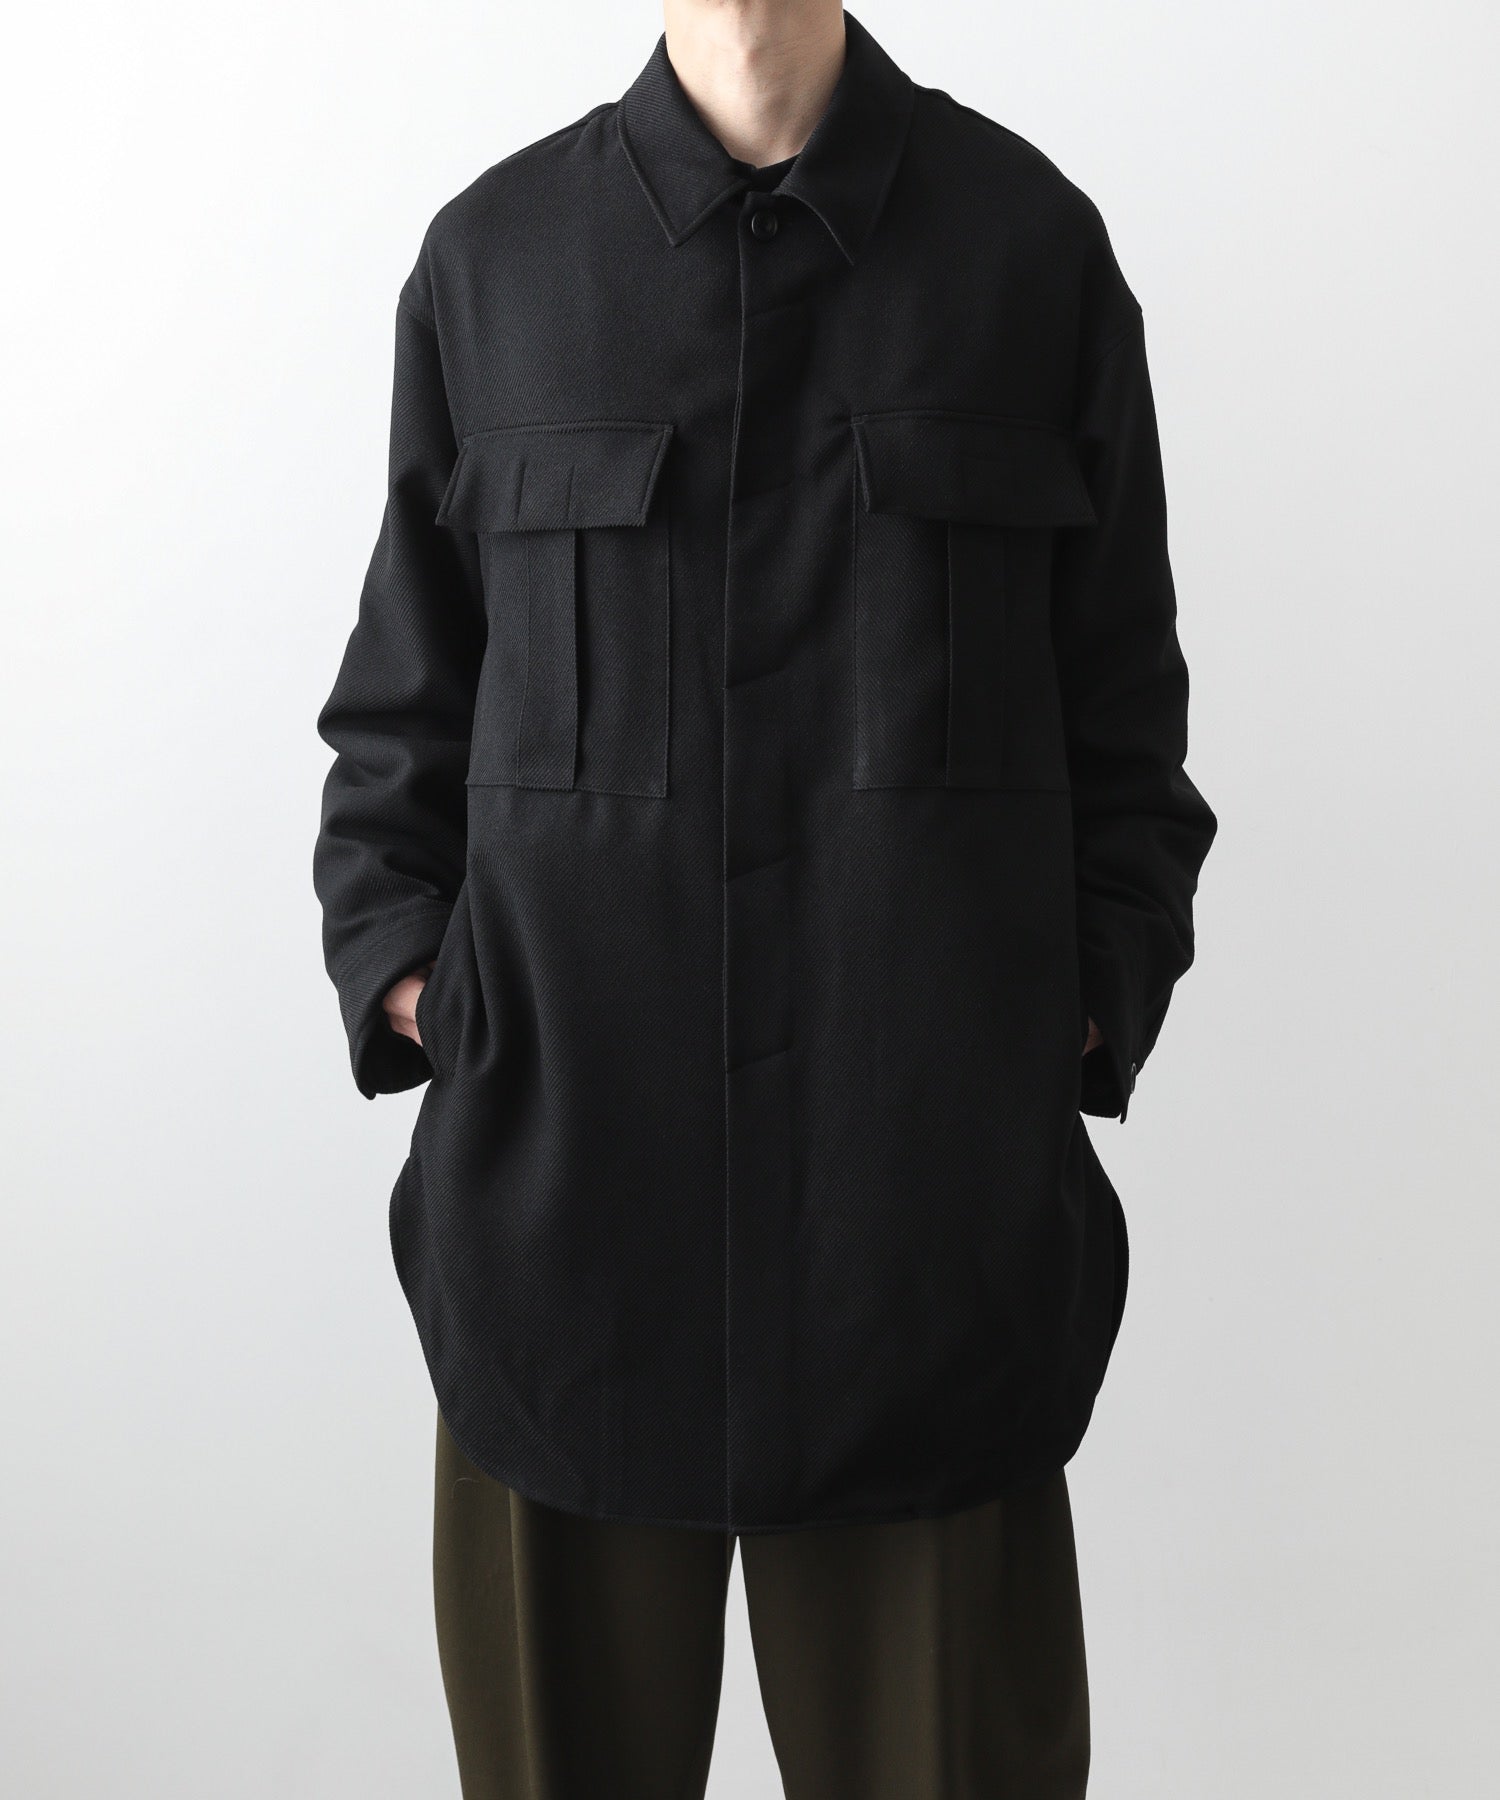 ato】OVERSIZED CPO SHIRT - BLACK | 公式通販サイト session(セッション)